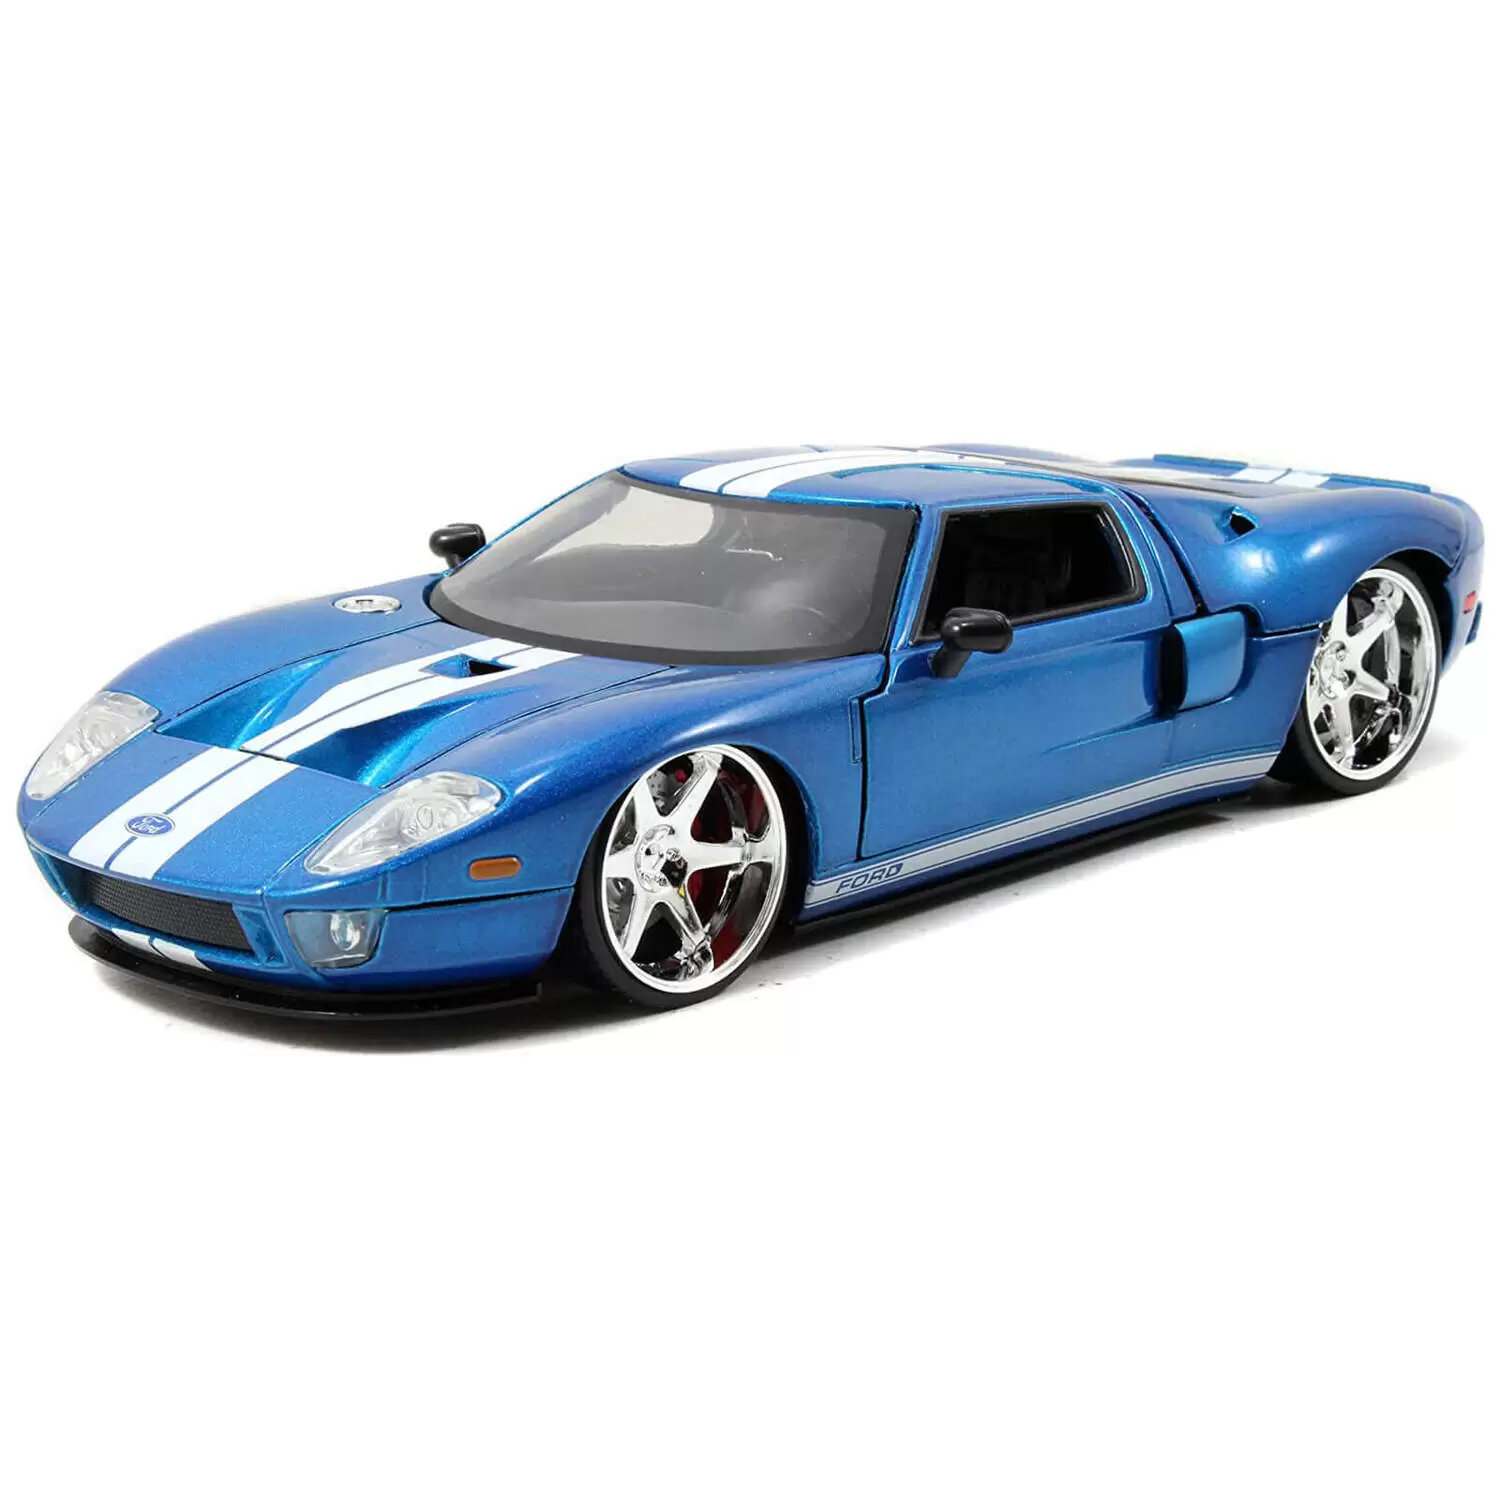 Jada Toys - Fast & Furious - 2005 Ford GT 1:24